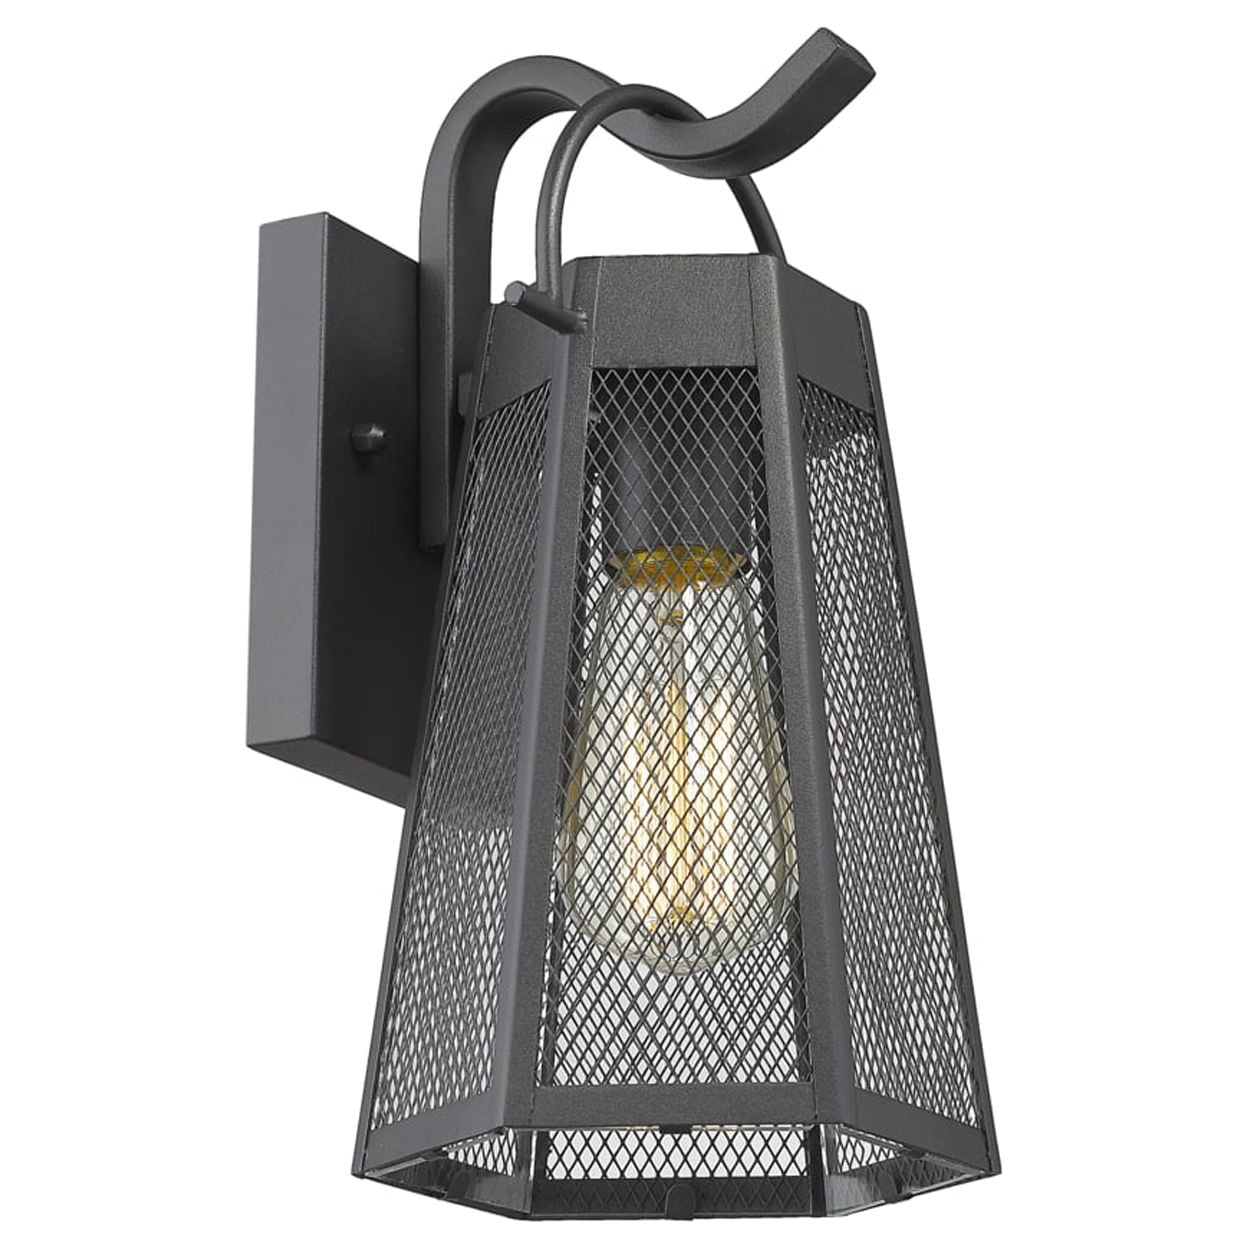 Picture of Chloe Lighting CH2D288BK12-OD1 Harper Industrial 1 Light Textured Black Outdoor Wall Sconce - 12 in.